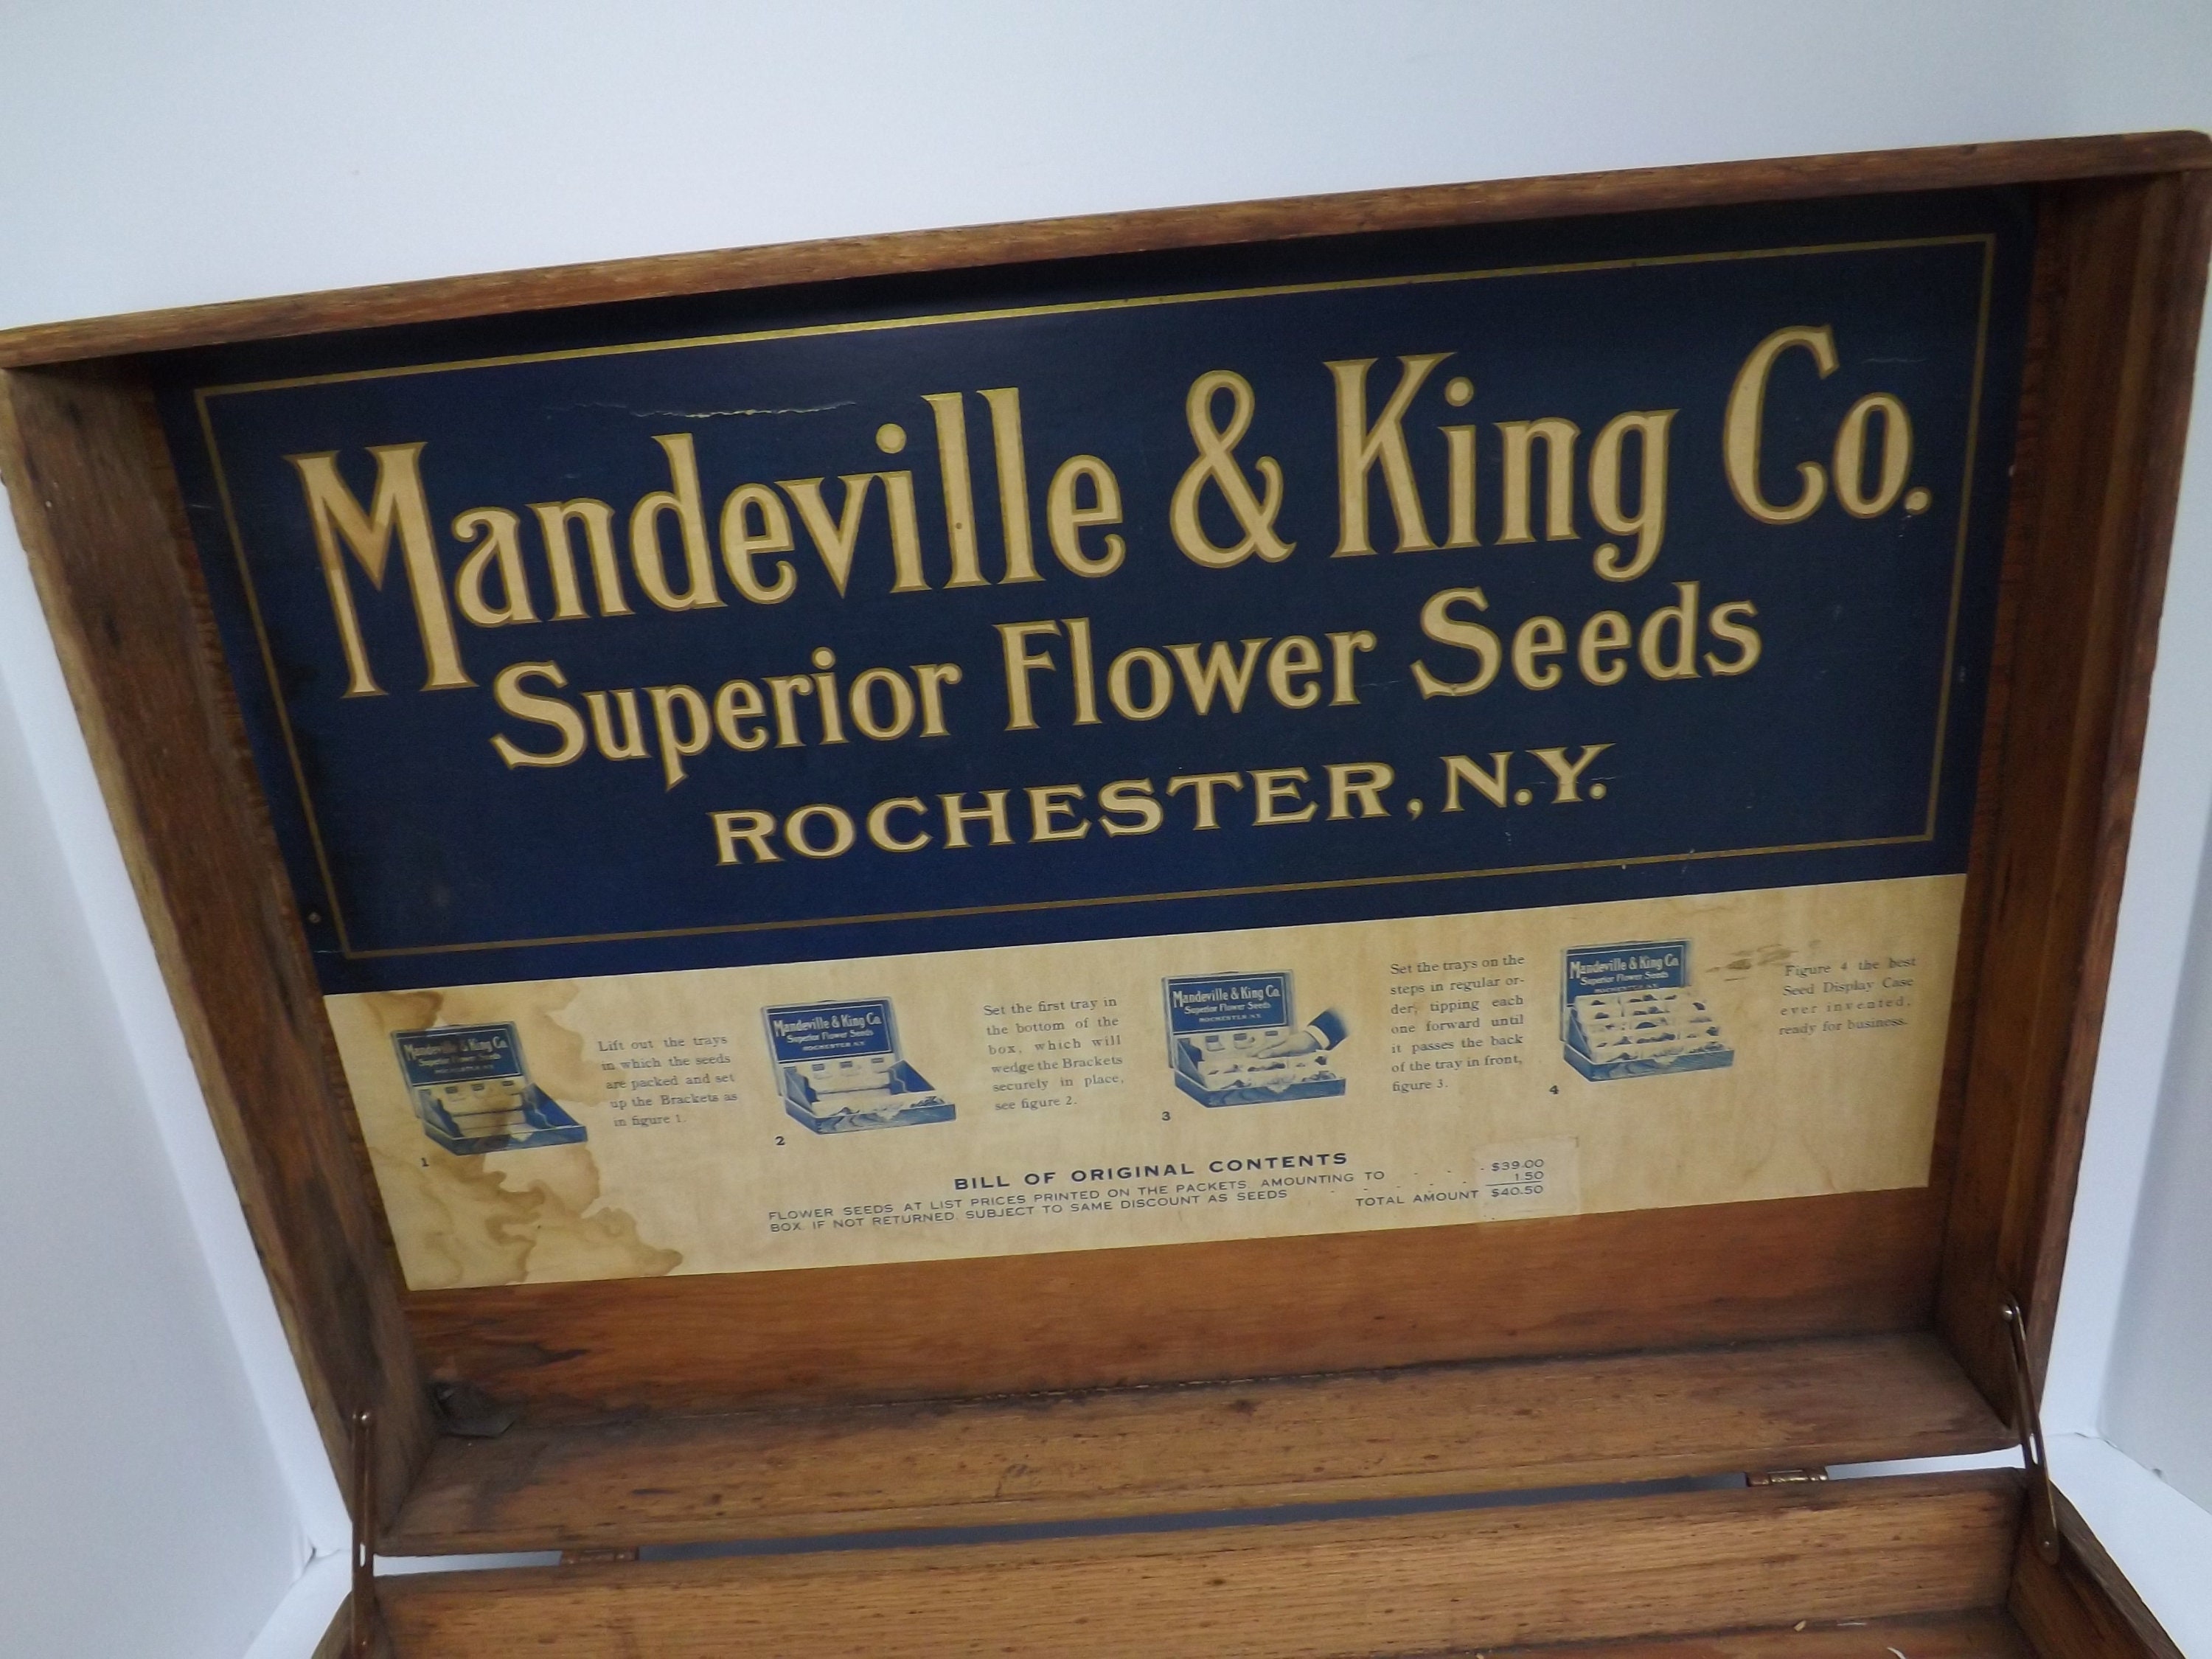 Rush Park Seed Co. seed display box, Independence, Iowa, dovetailed hinged  wooden box - The Junk Parlor